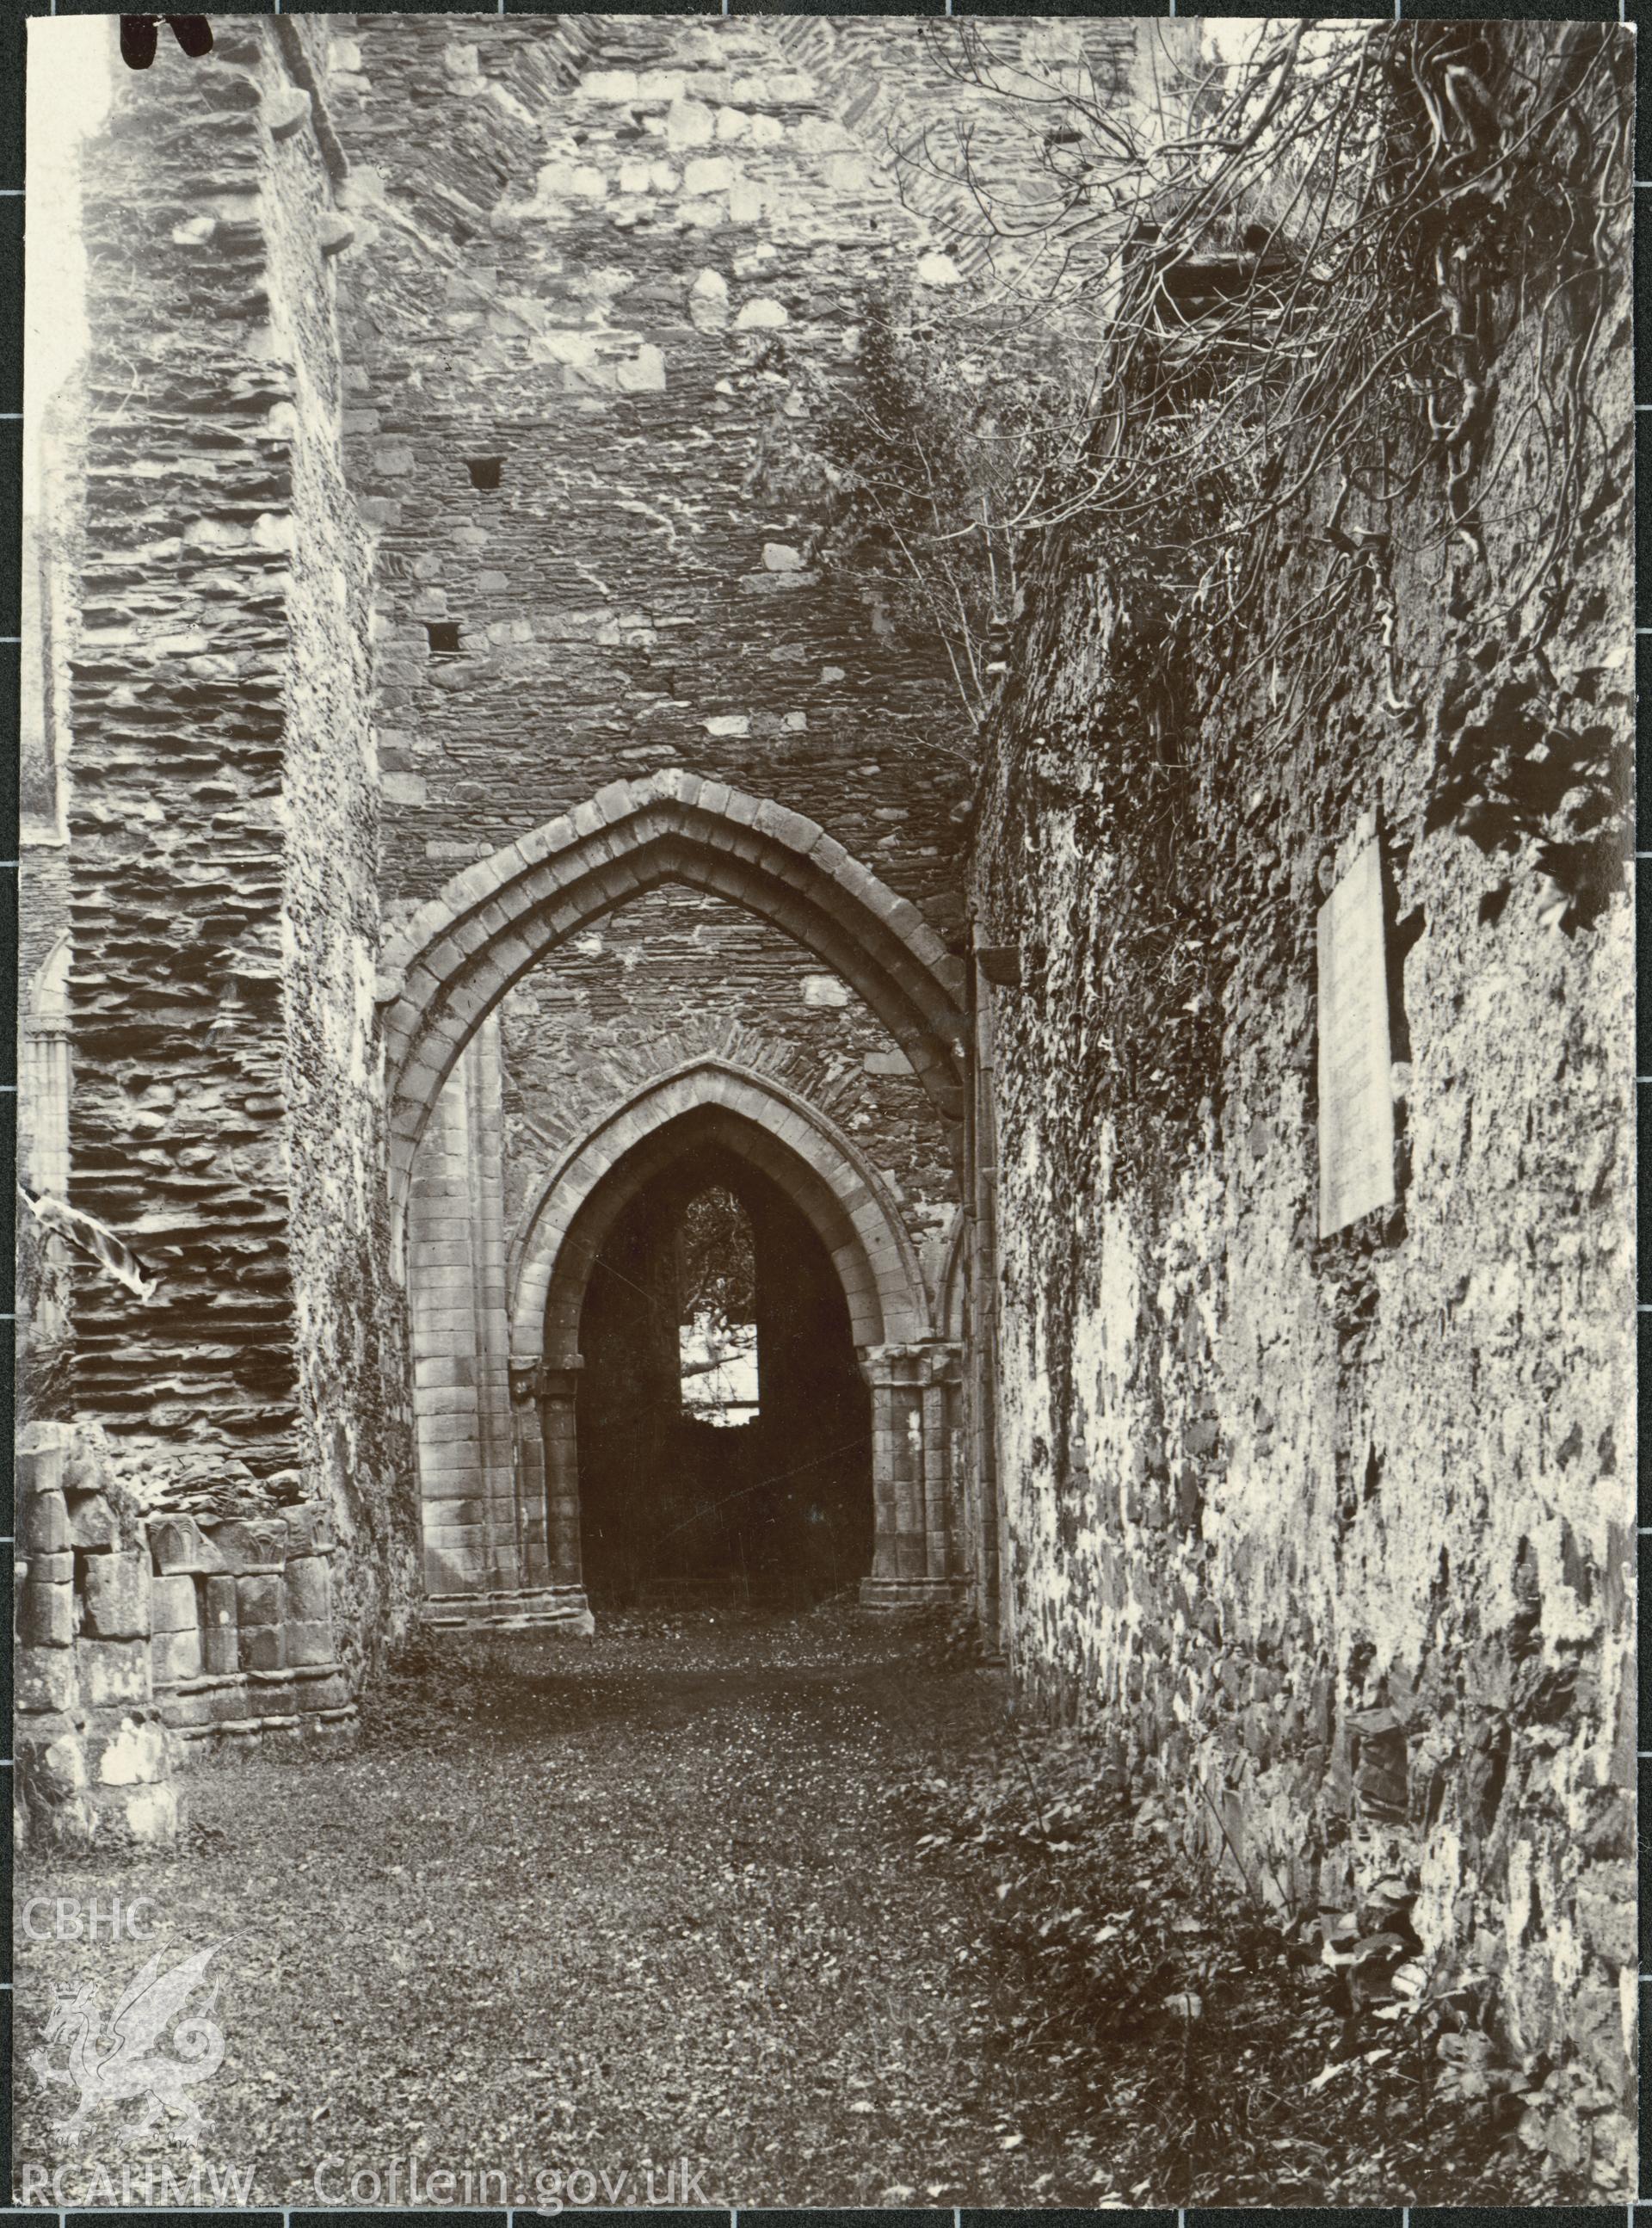 Albumen print by T.W. Reader showing arches at Valle Crucis Abbey.